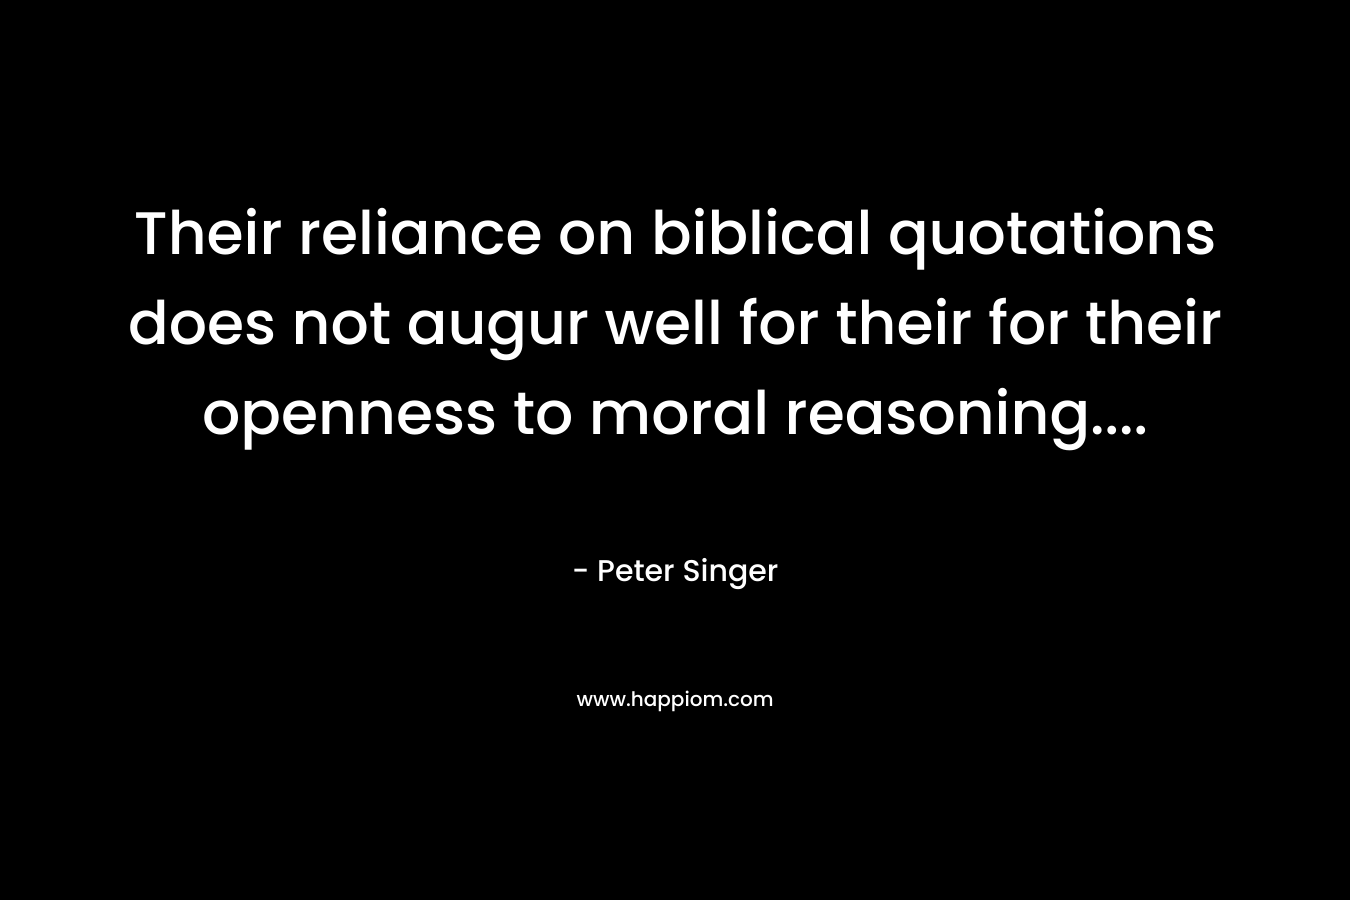 Their reliance on biblical quotations does not augur well for their for their openness to moral reasoning....